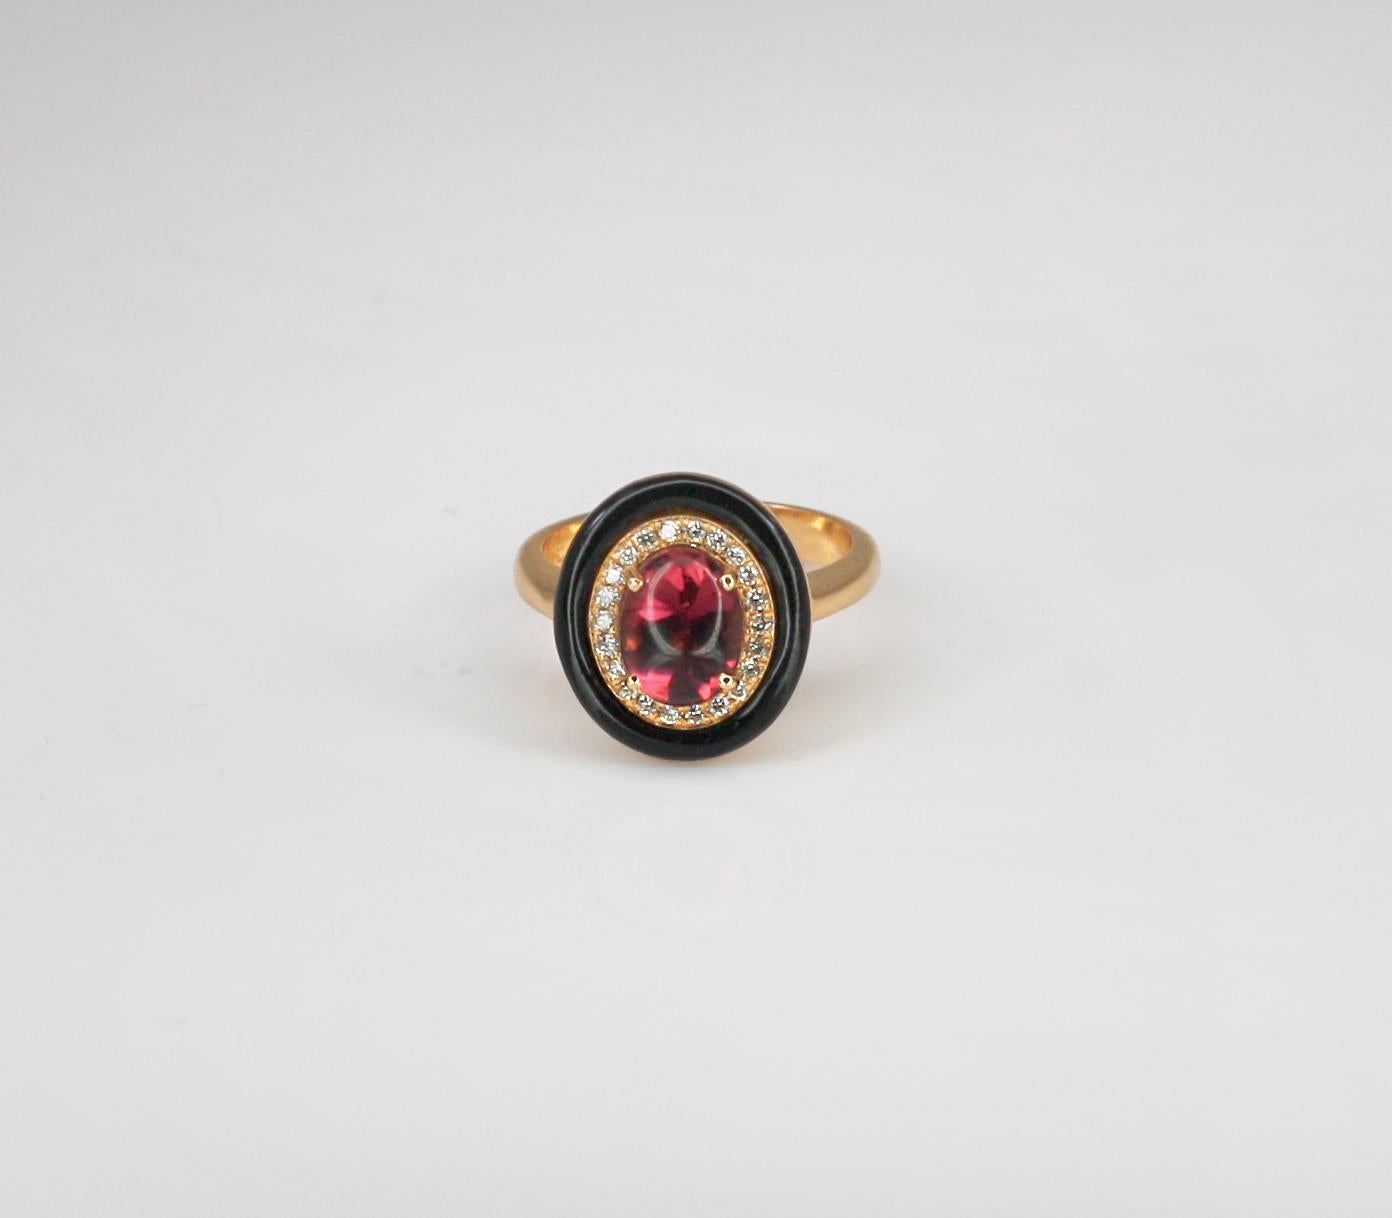 This S.Georgios Designer Ring is all hand-made in yellow Gold 18 Karat. The stunning piece features a solitaire Cabochon Natural Tourmaline with a total weight of 2.00 Carat and natural white brilliant cut diamonds total weight of 0.18 Carat. We